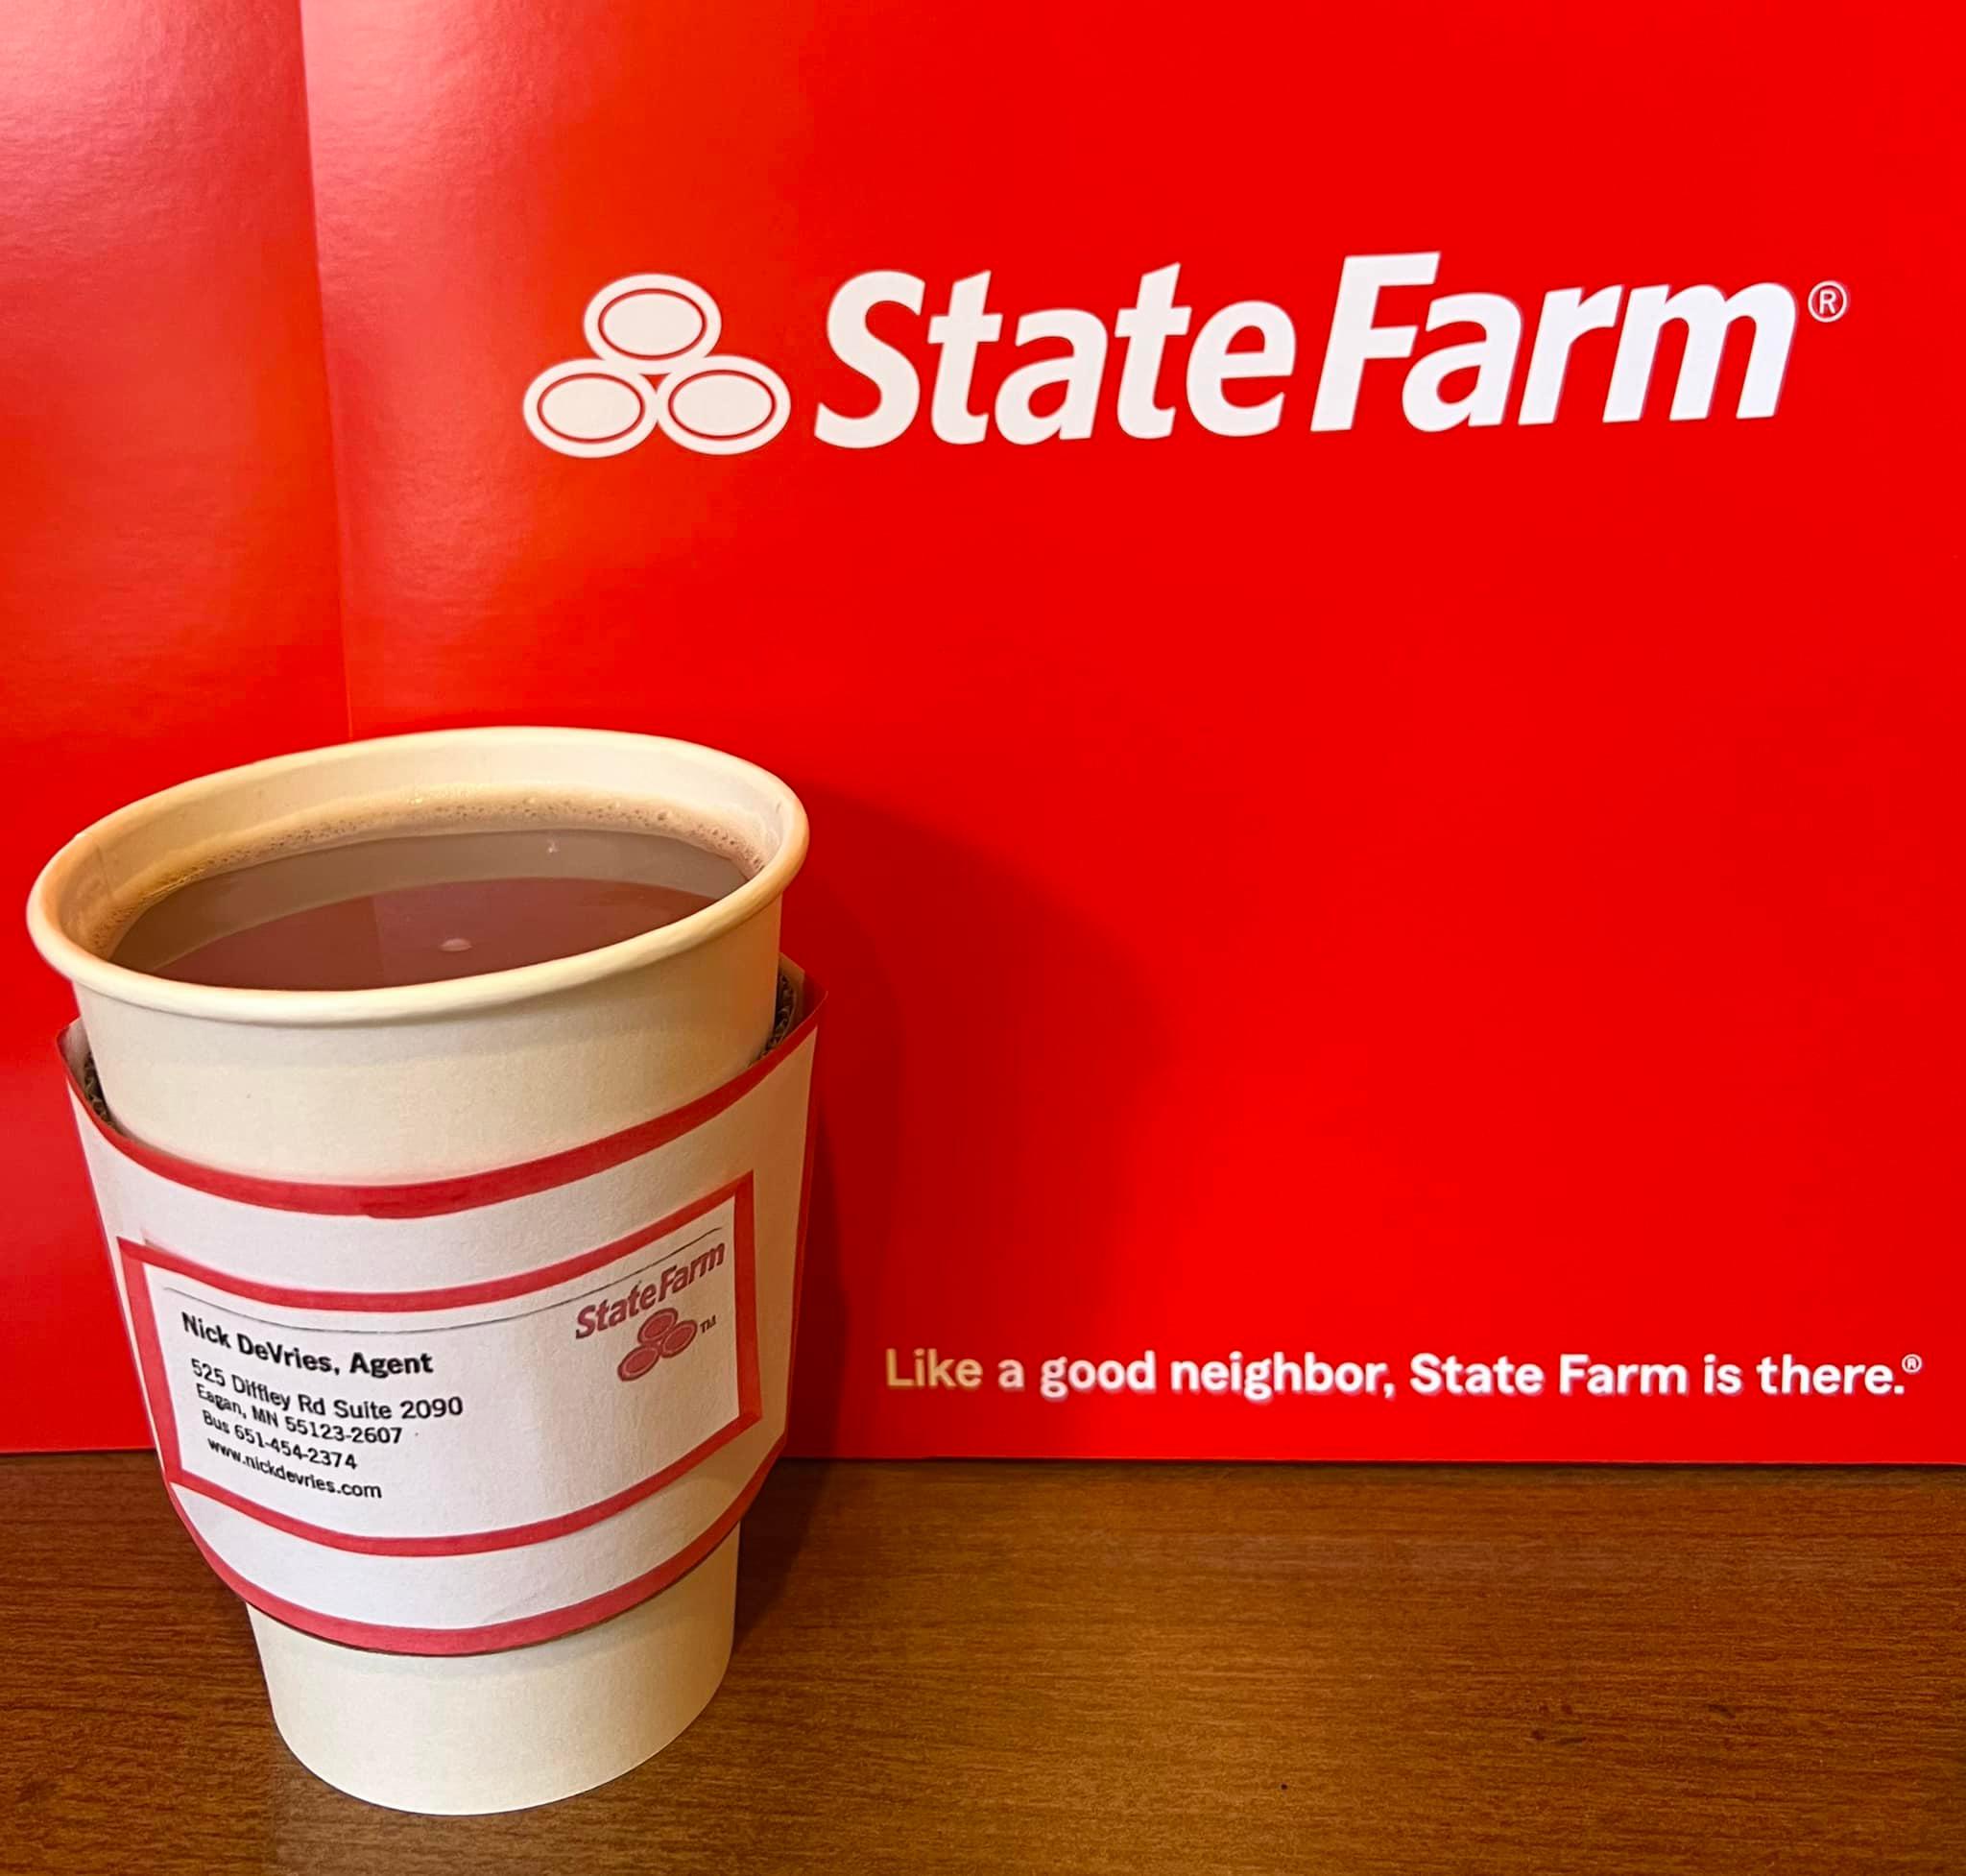 We are celebrating National Hot Chocolate Day here at Nick DeVries State Farm Agency!

Visit us to l Nick DeVries - State Farm Insurance Agent Eagan (651)454-2374